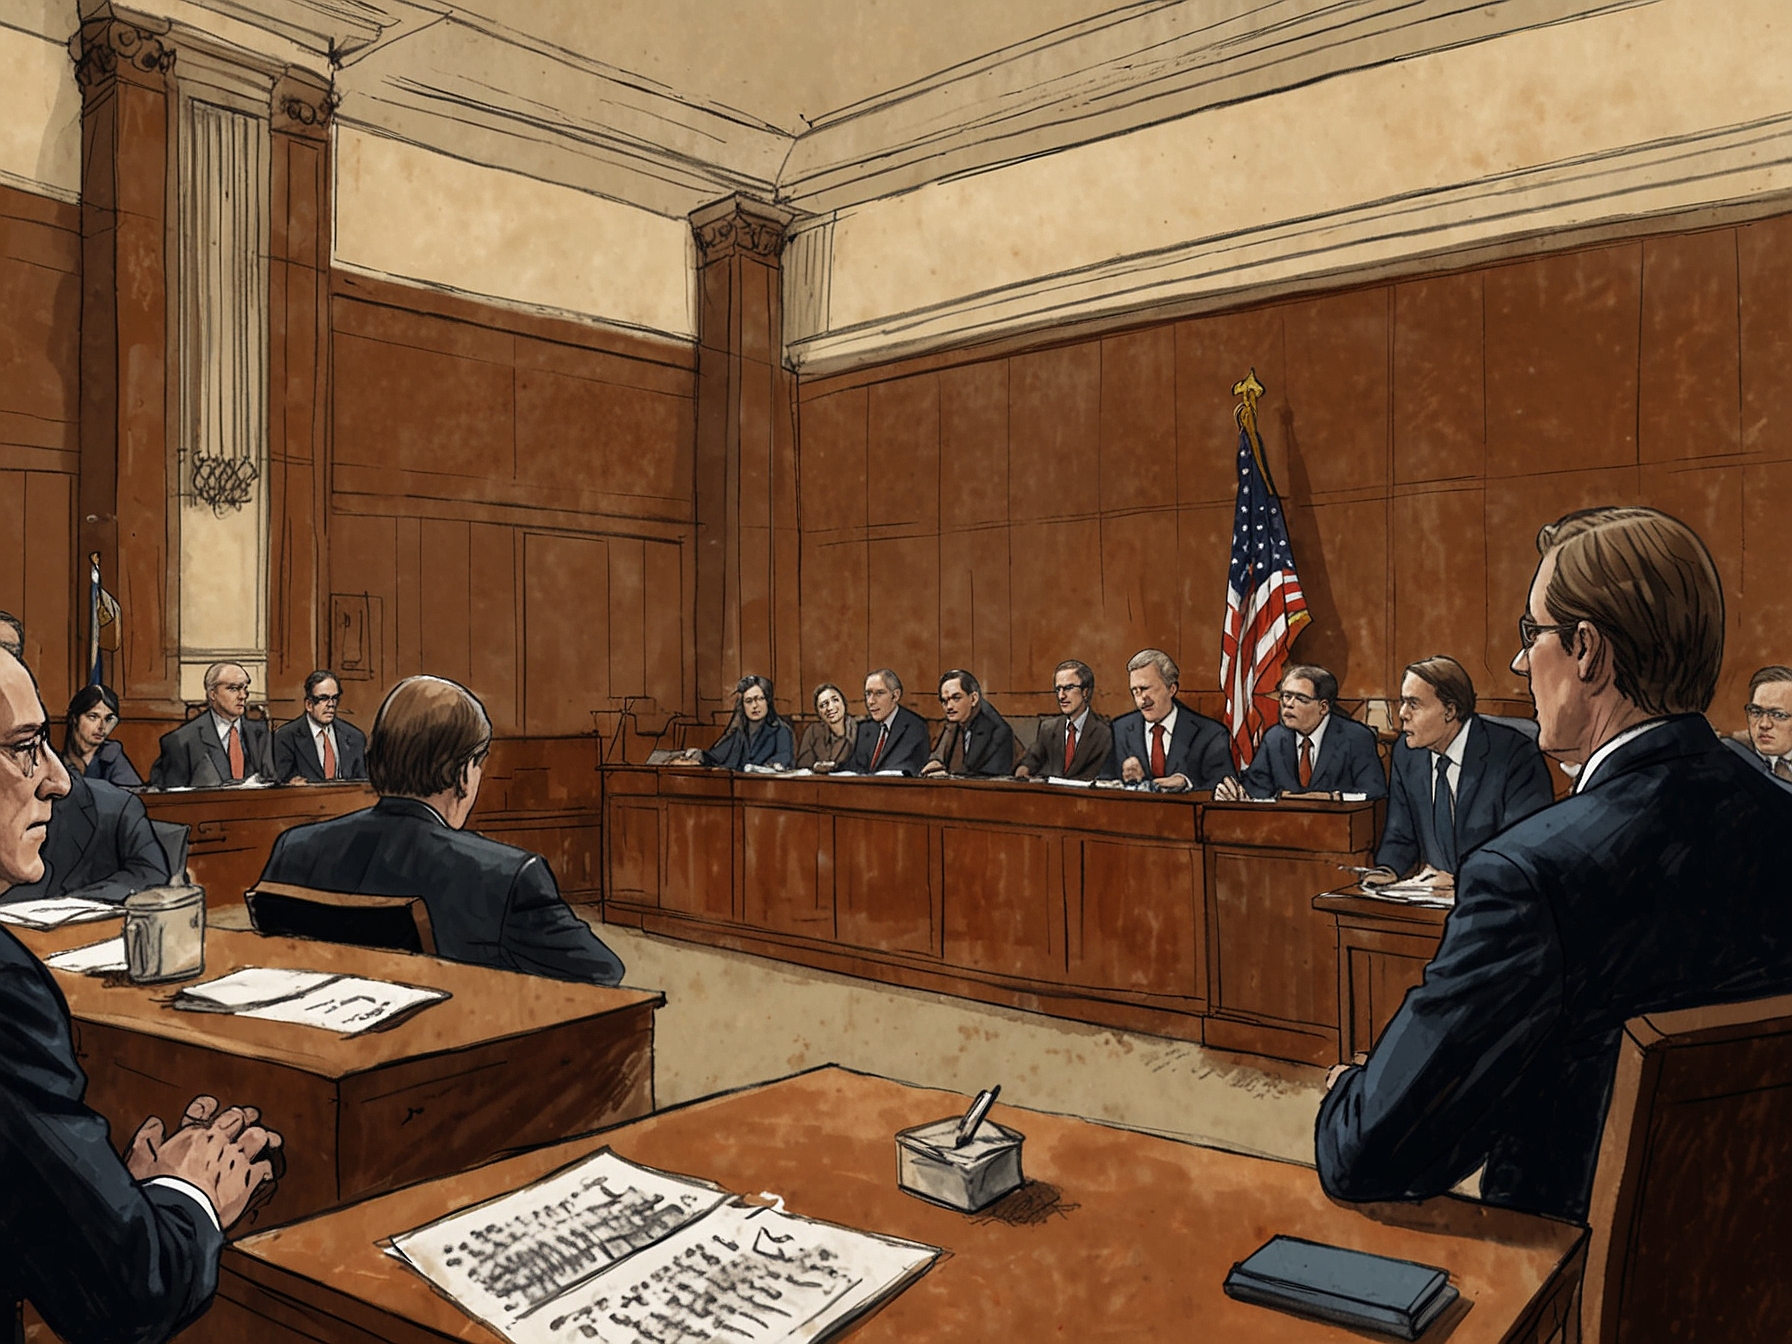 A courtroom sketch showing David DePape on trial. The tense atmosphere and detailed evidence presented highlight the significant legal consequences of targeting public officials and their families.